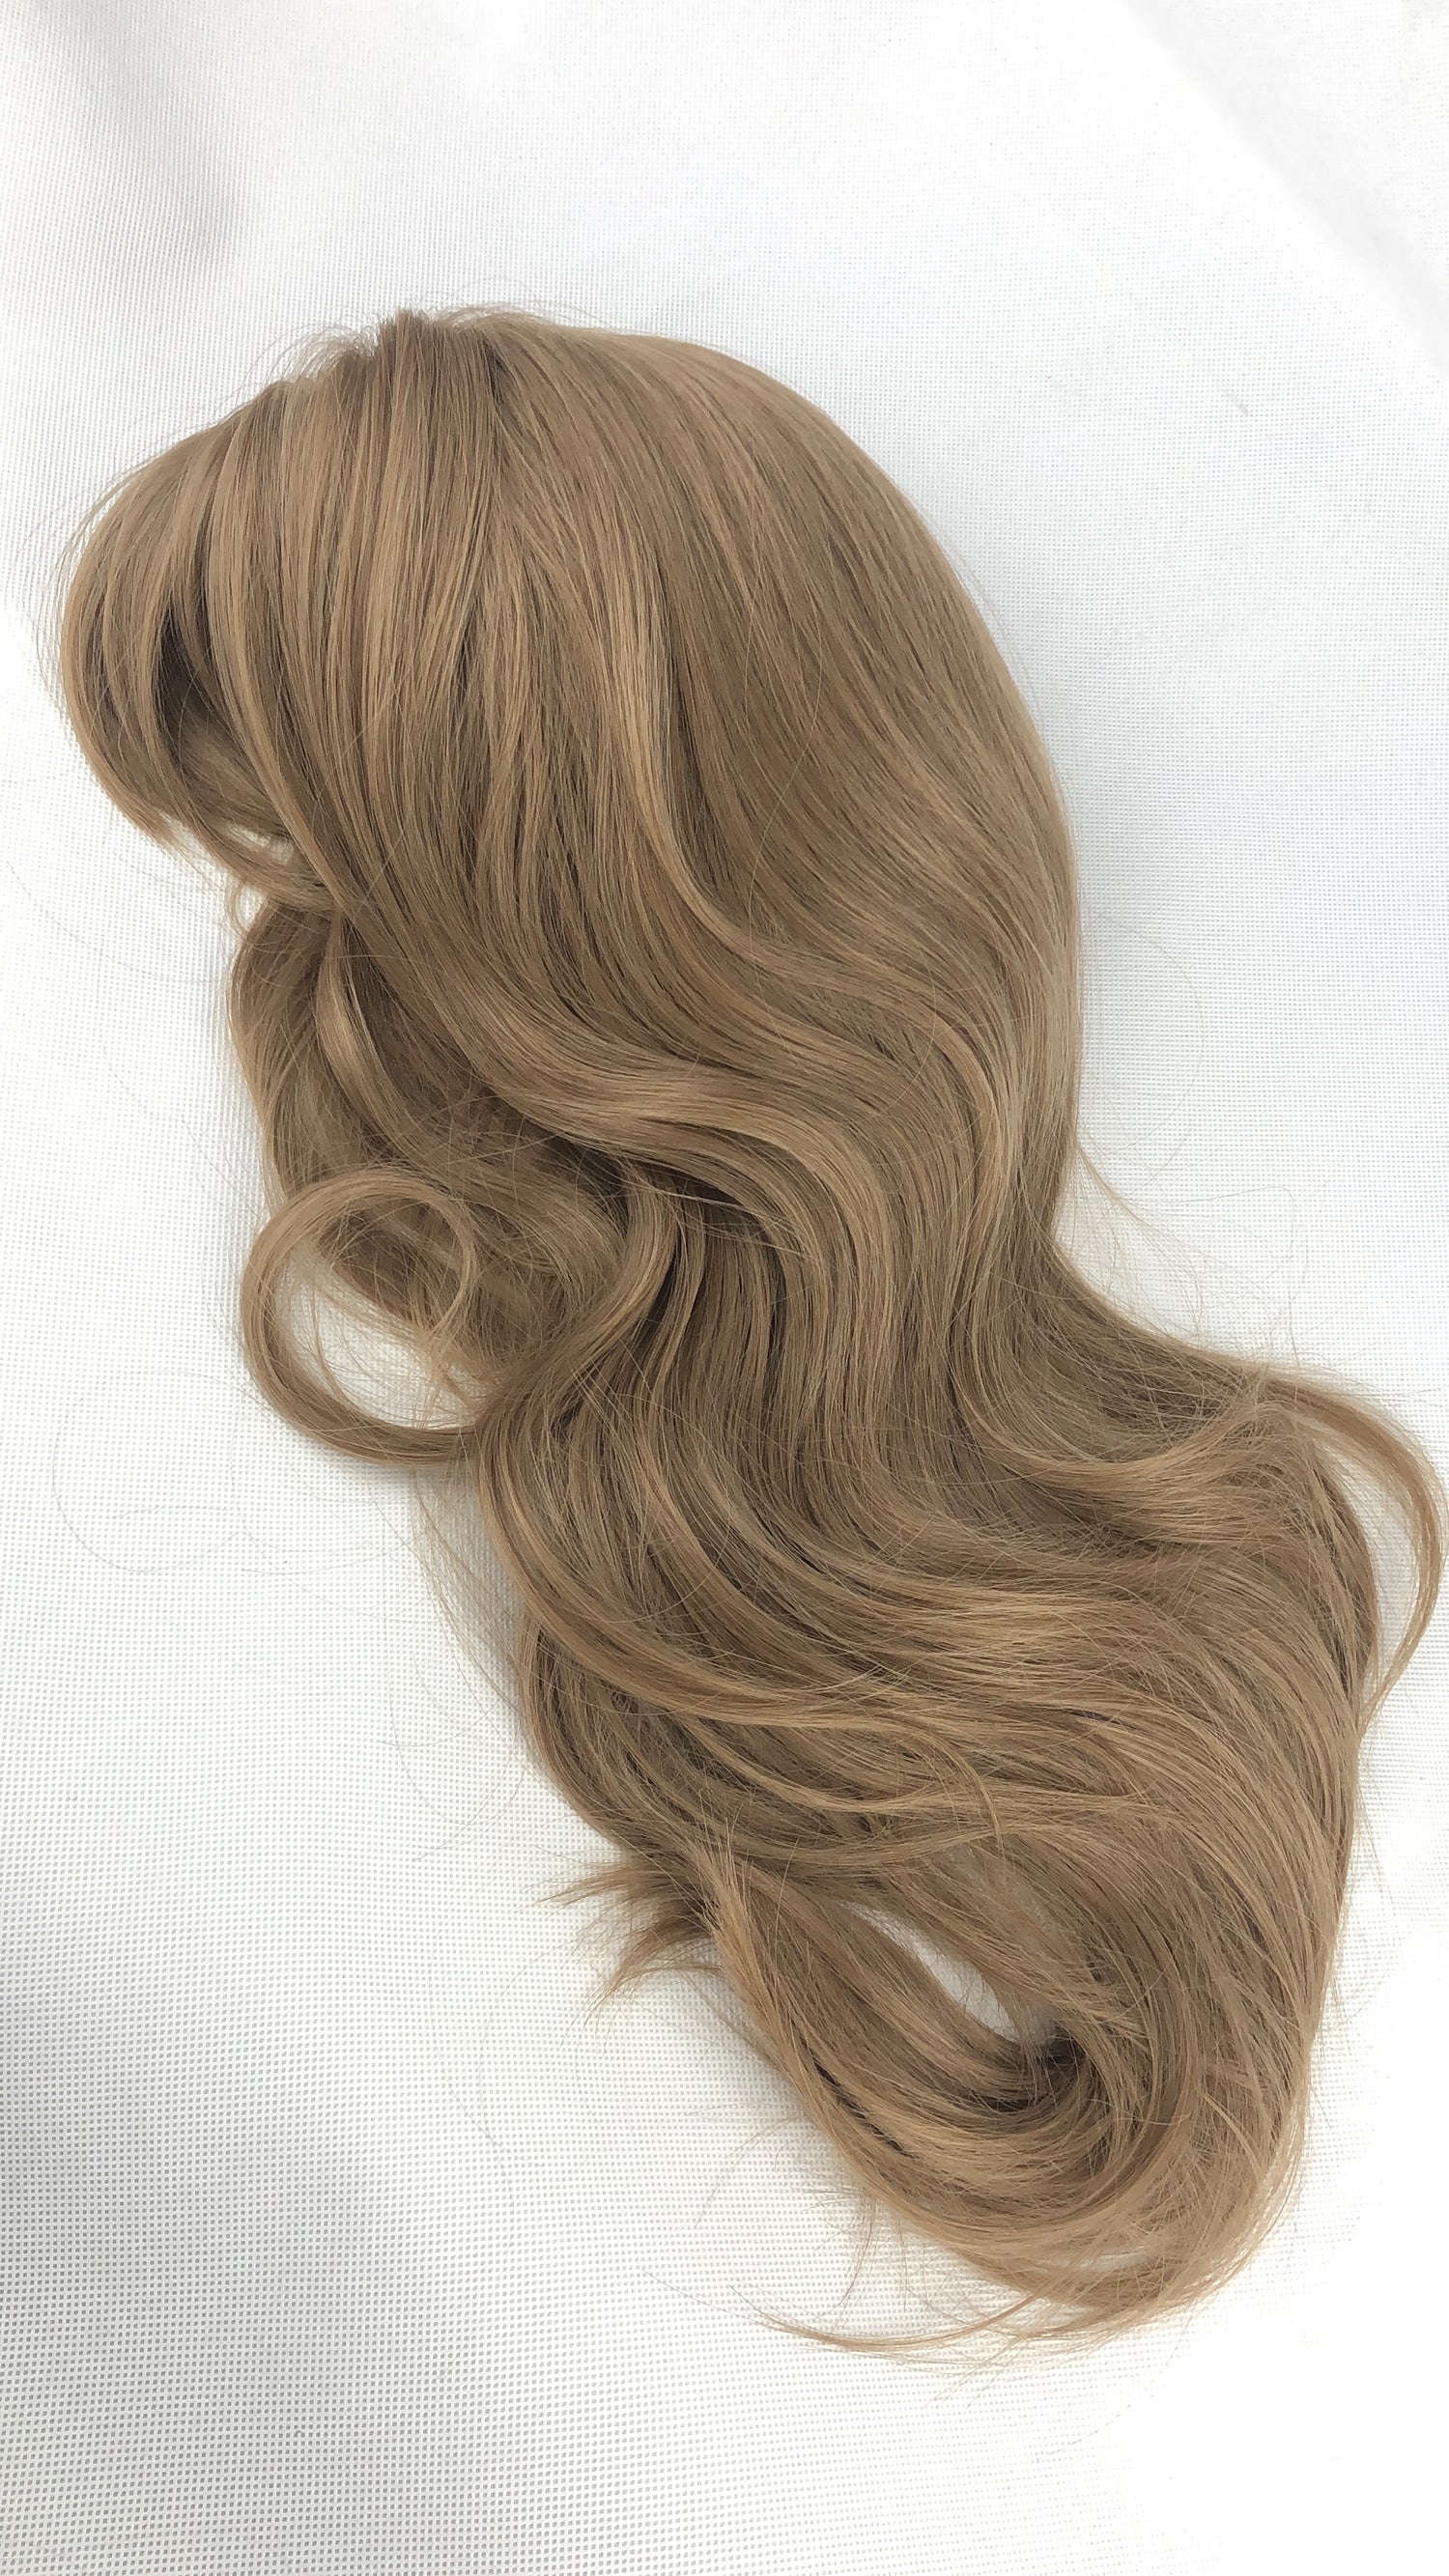 Image of various wigs showcasing the latest styles and colors from the 'New Arrivals' collection, highlighting their natural and comfortable fit.